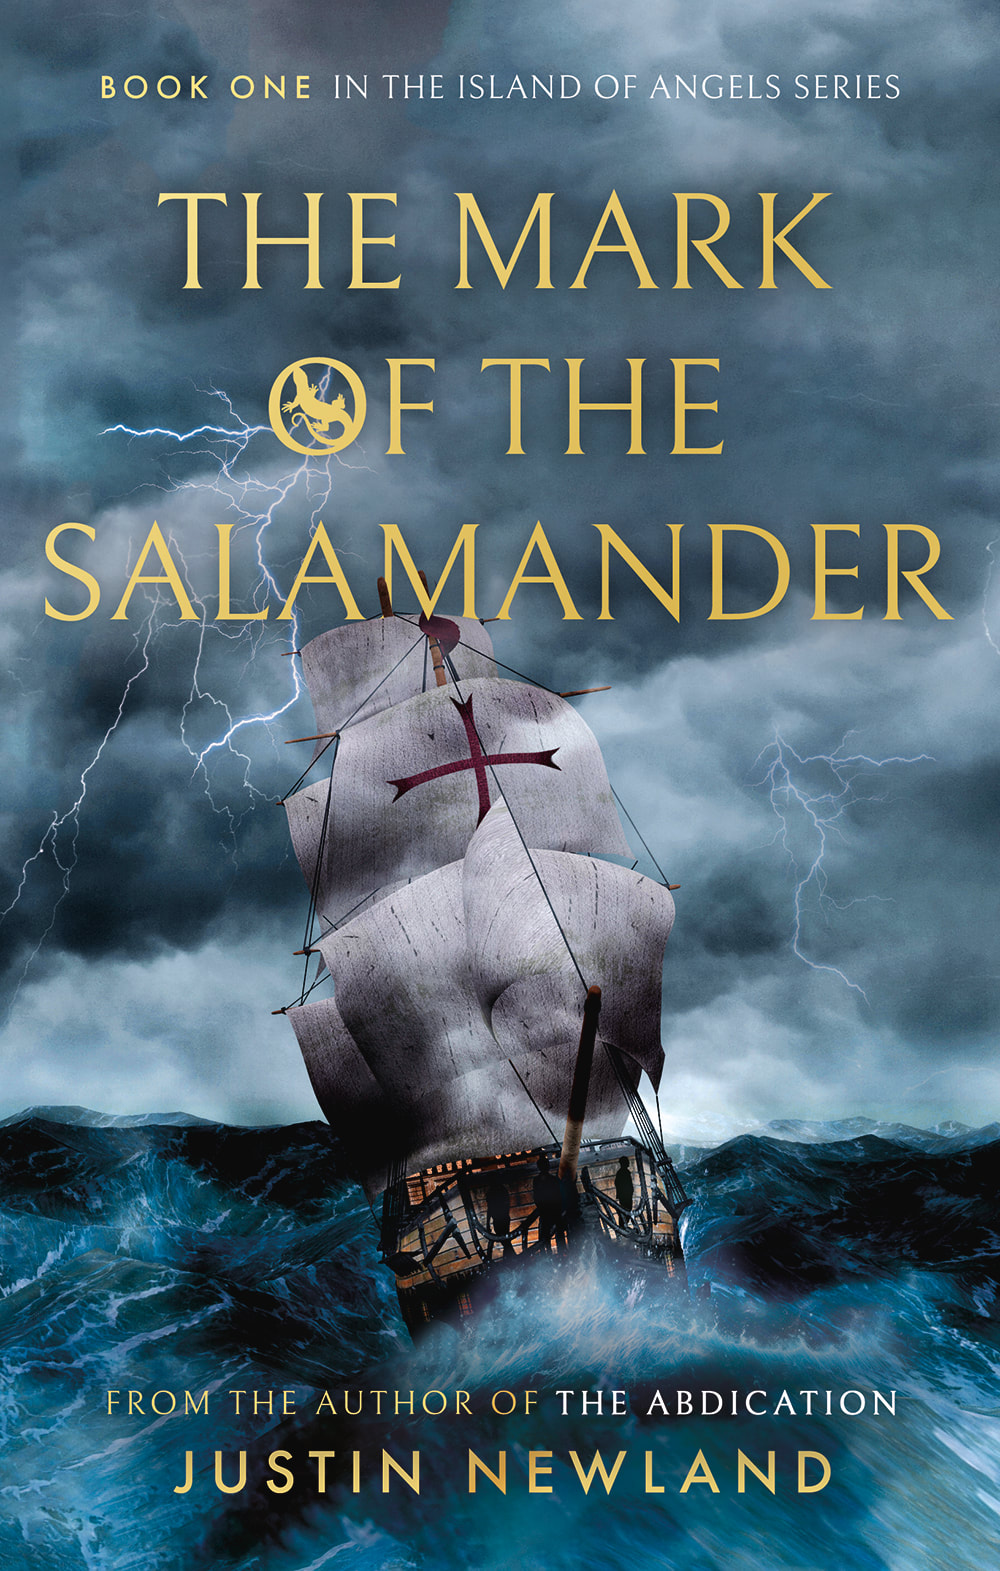 THE MARK OF THE SALAMANDER by Justin Newland